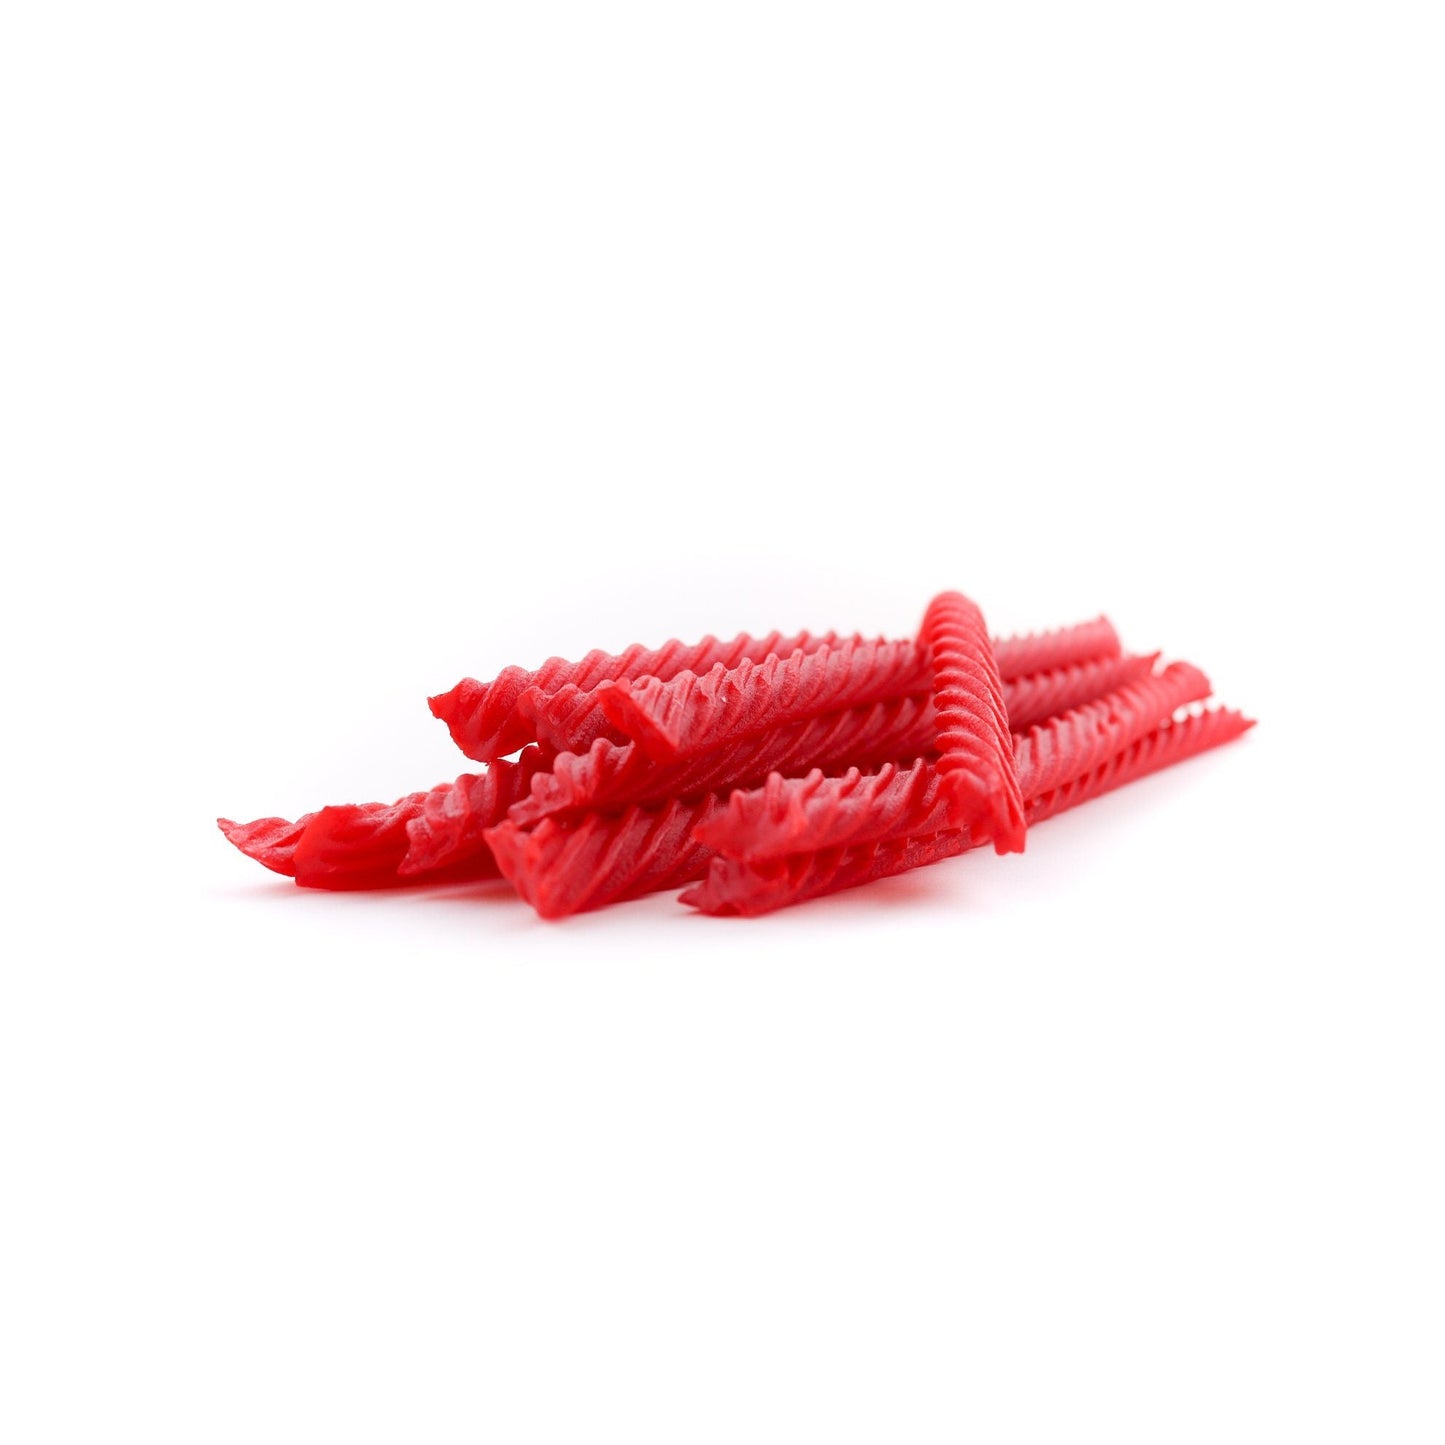 Original Red Licorice candy in a pile